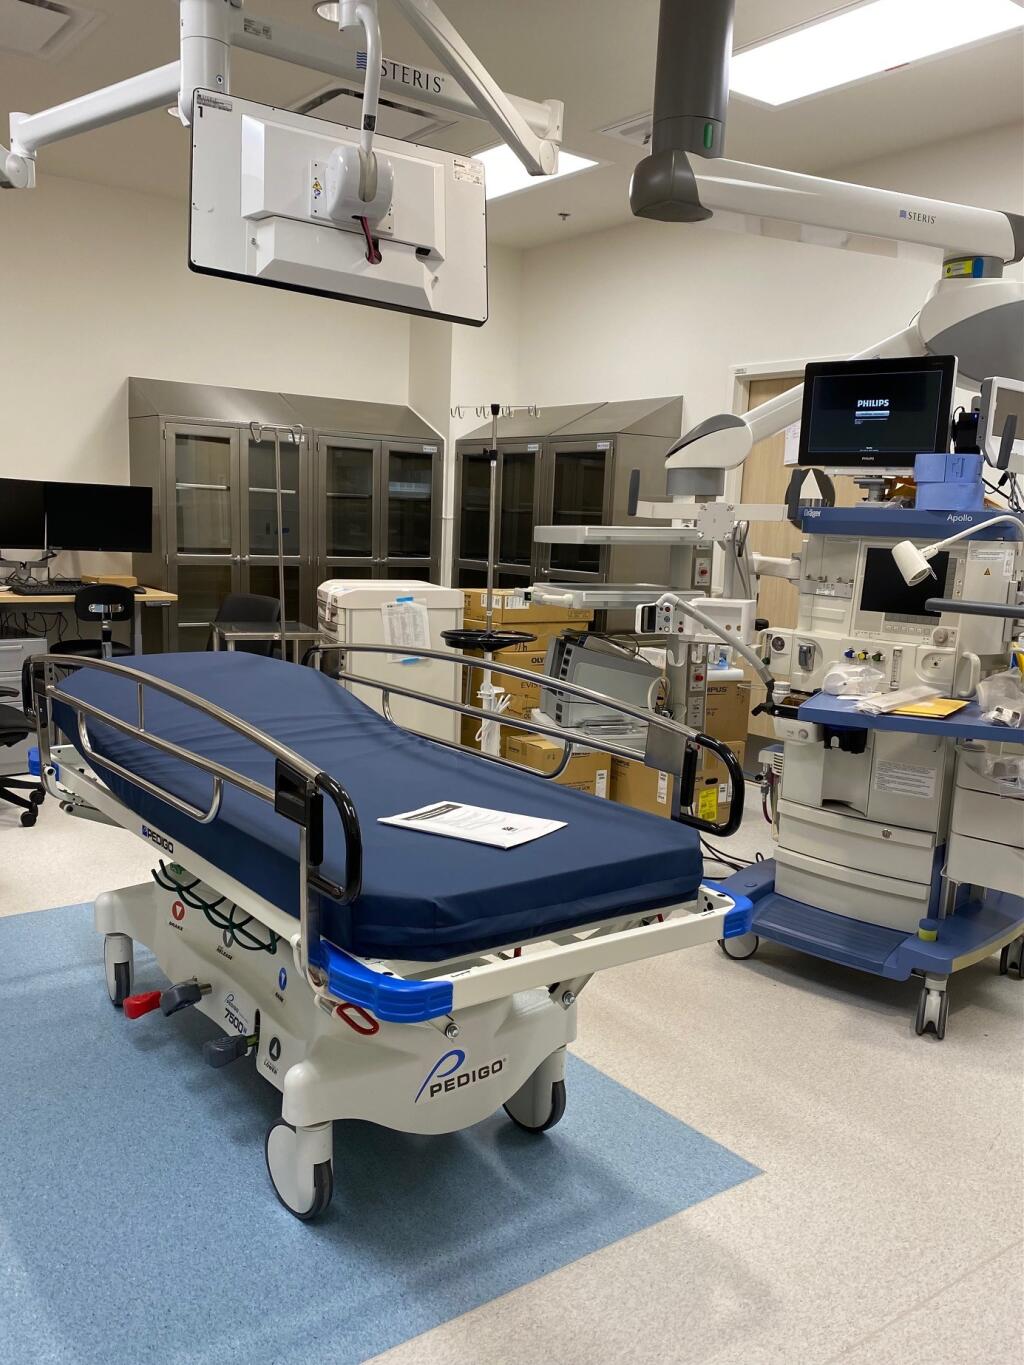 Gastroenterology and endoscopy procedures will be performed in this new operating room in Sutter Santa Rosa Regional Hospital’s new tower, slated to open May 3, 2022. (Cheryl Sarfaty / North Bay Business Journal)